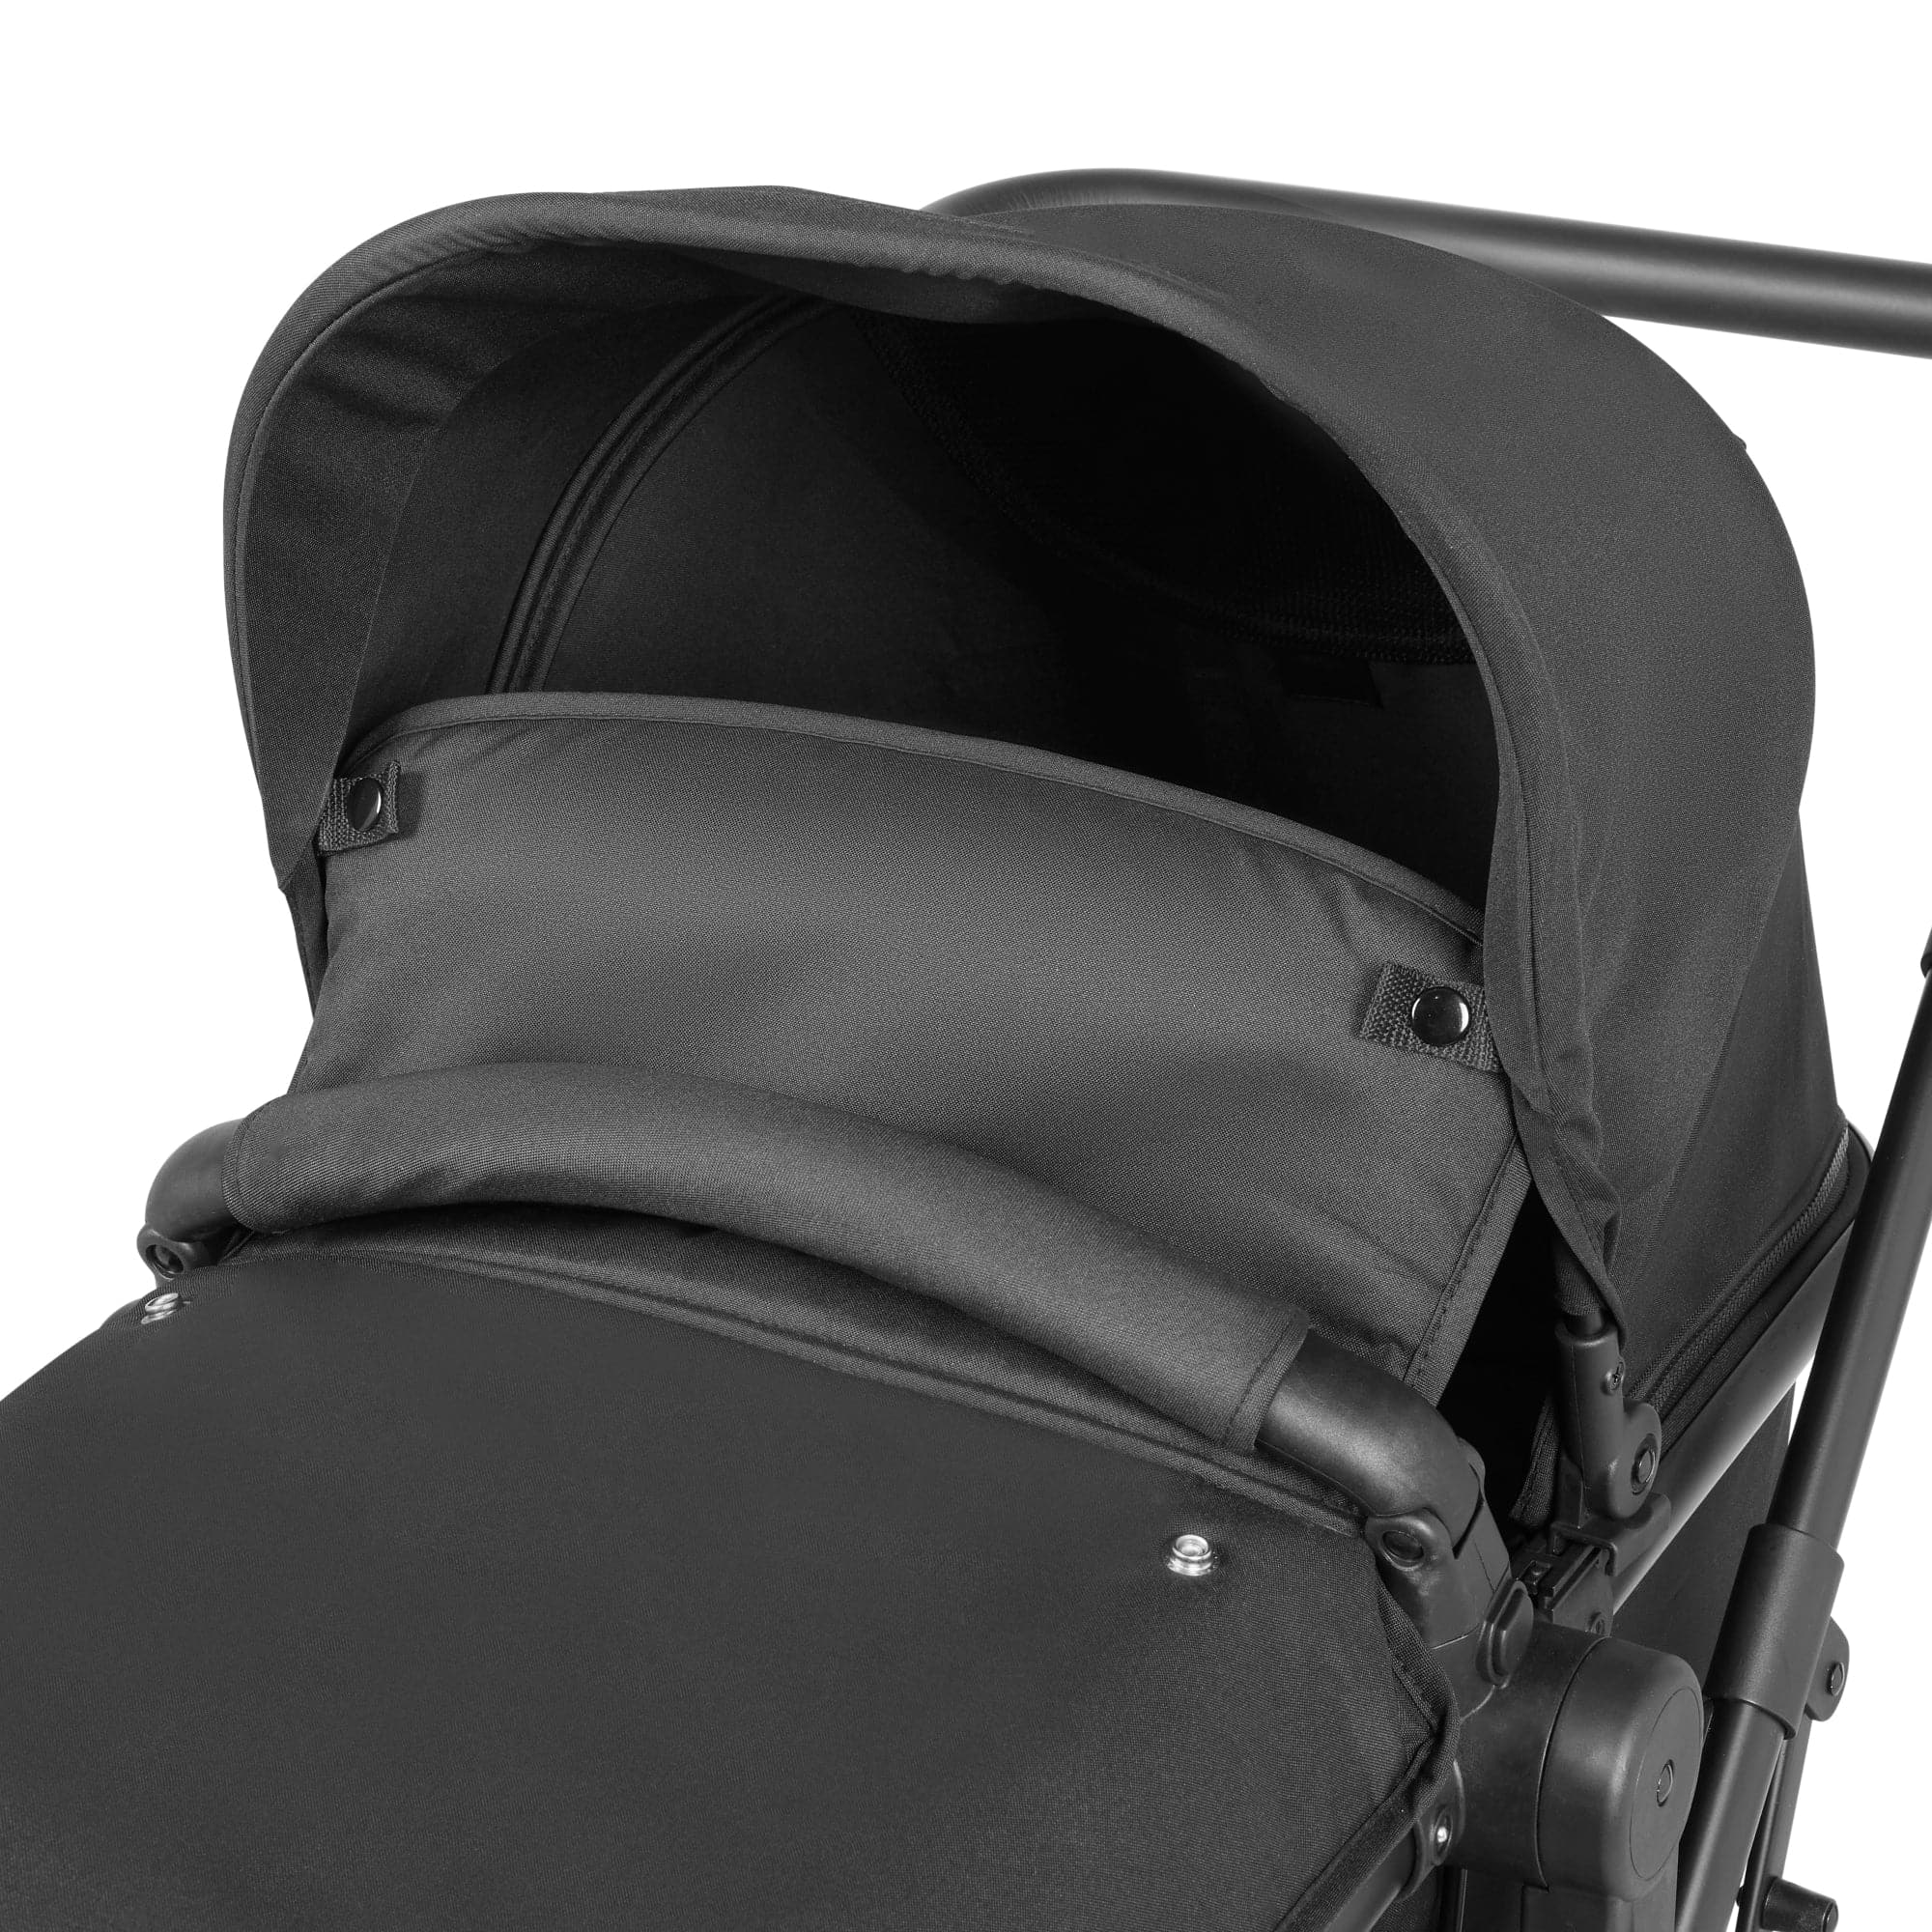 Ickle Bubba Comet I-Size Travel System With Stratus Car Seat & Isofix Base- Black -  | For Your Little One